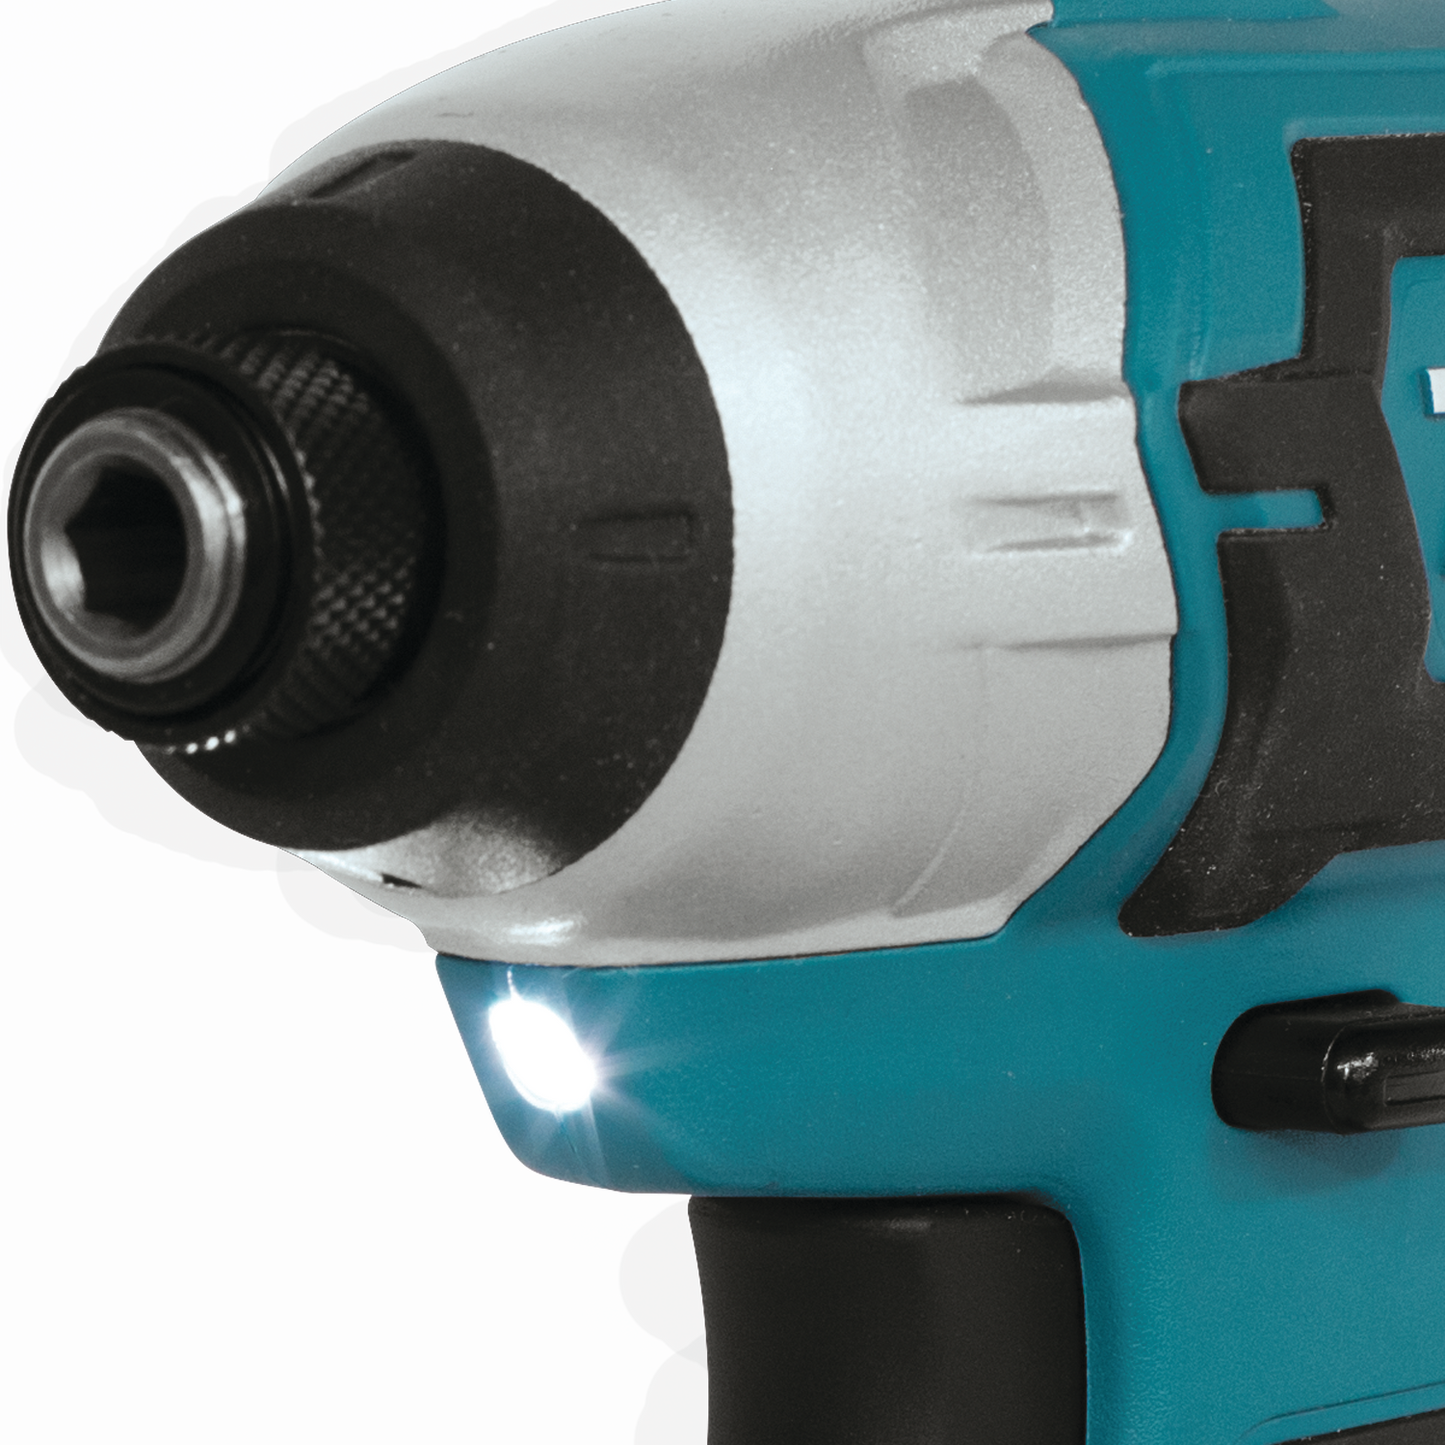 Makita 12 Volt Max Lithium Ion Cordless Impact Driver Factory Serviced (Tool Only)